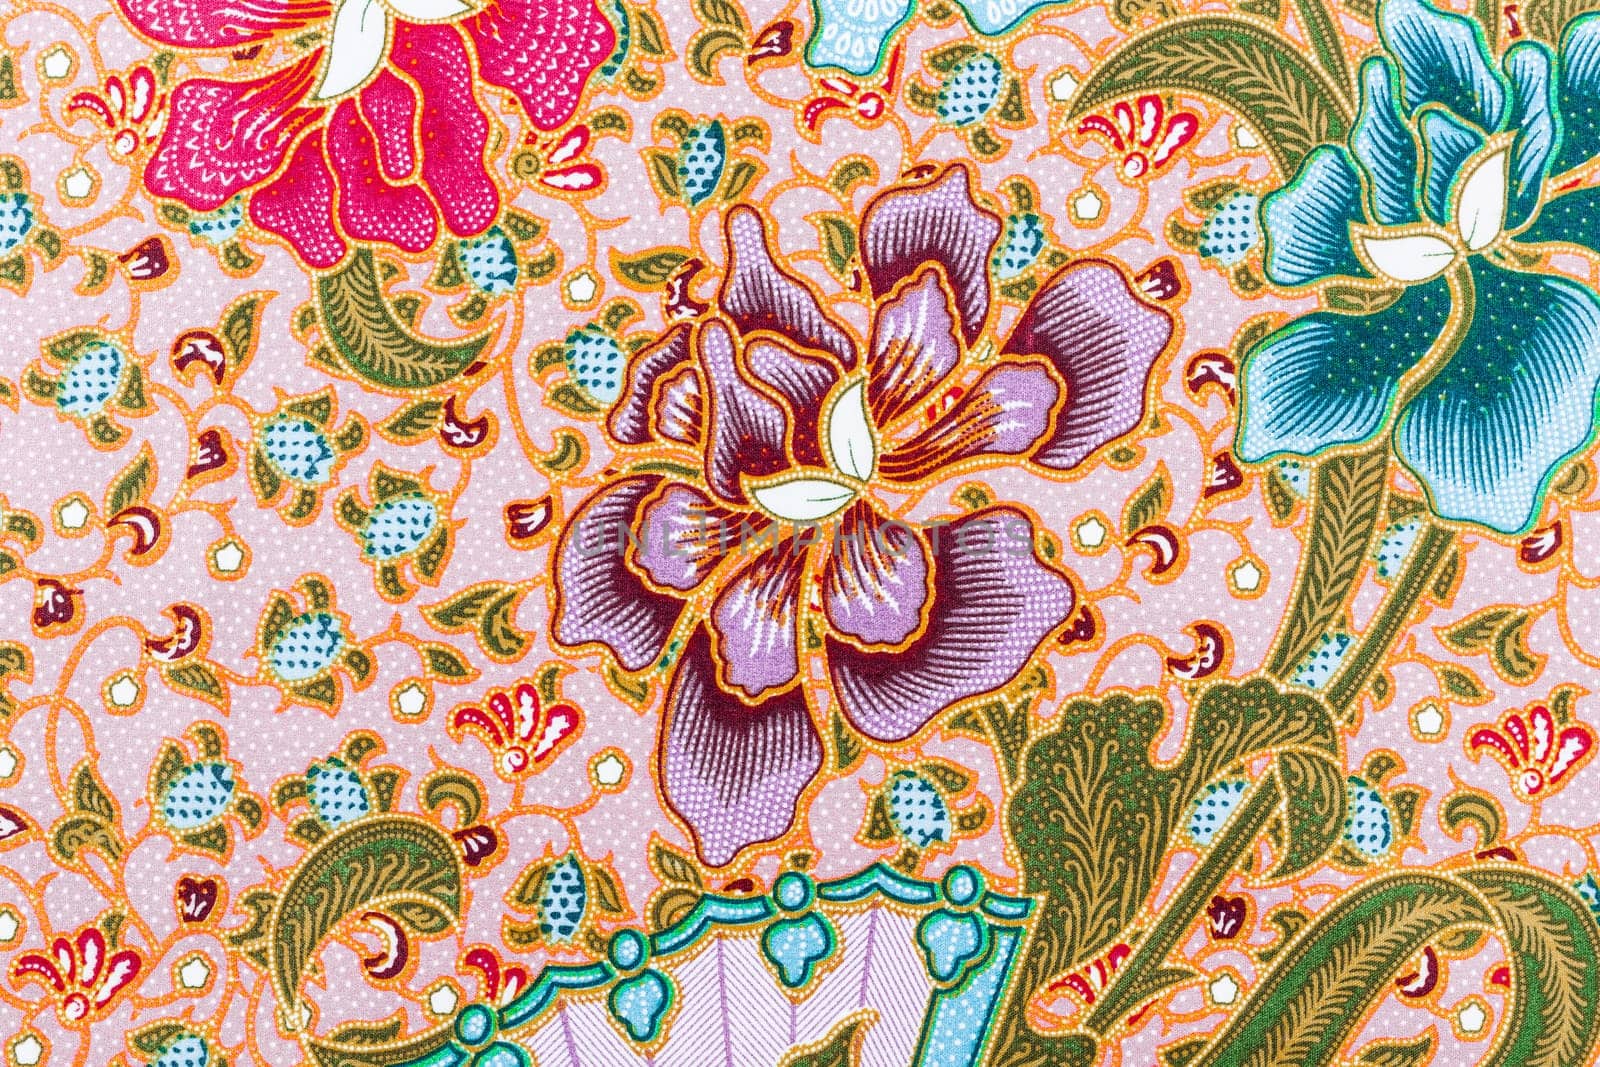 The Batik pattern from Solo, Central Java, Indonesia. consists of leaf and flower patterns by Gamjai